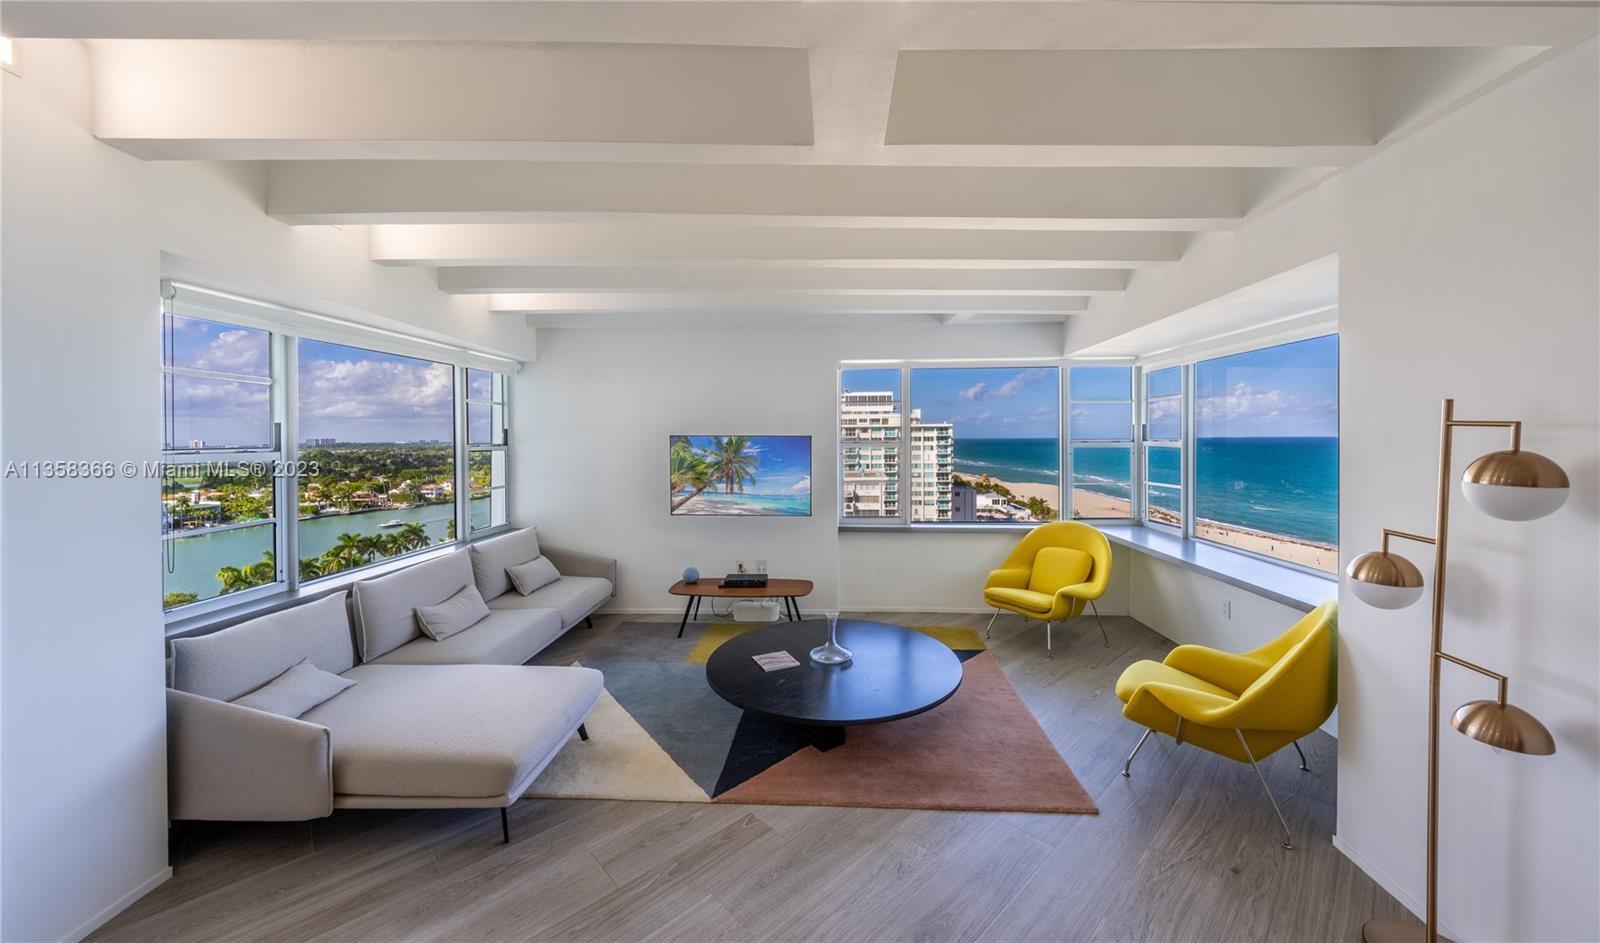 UNRIVALED DIRECT OCEAN VIEWS FROM EVERY WINDOW AND UNMATCHED COMFORT WITH LOFT LIKE 10 FOOT CEILINGS